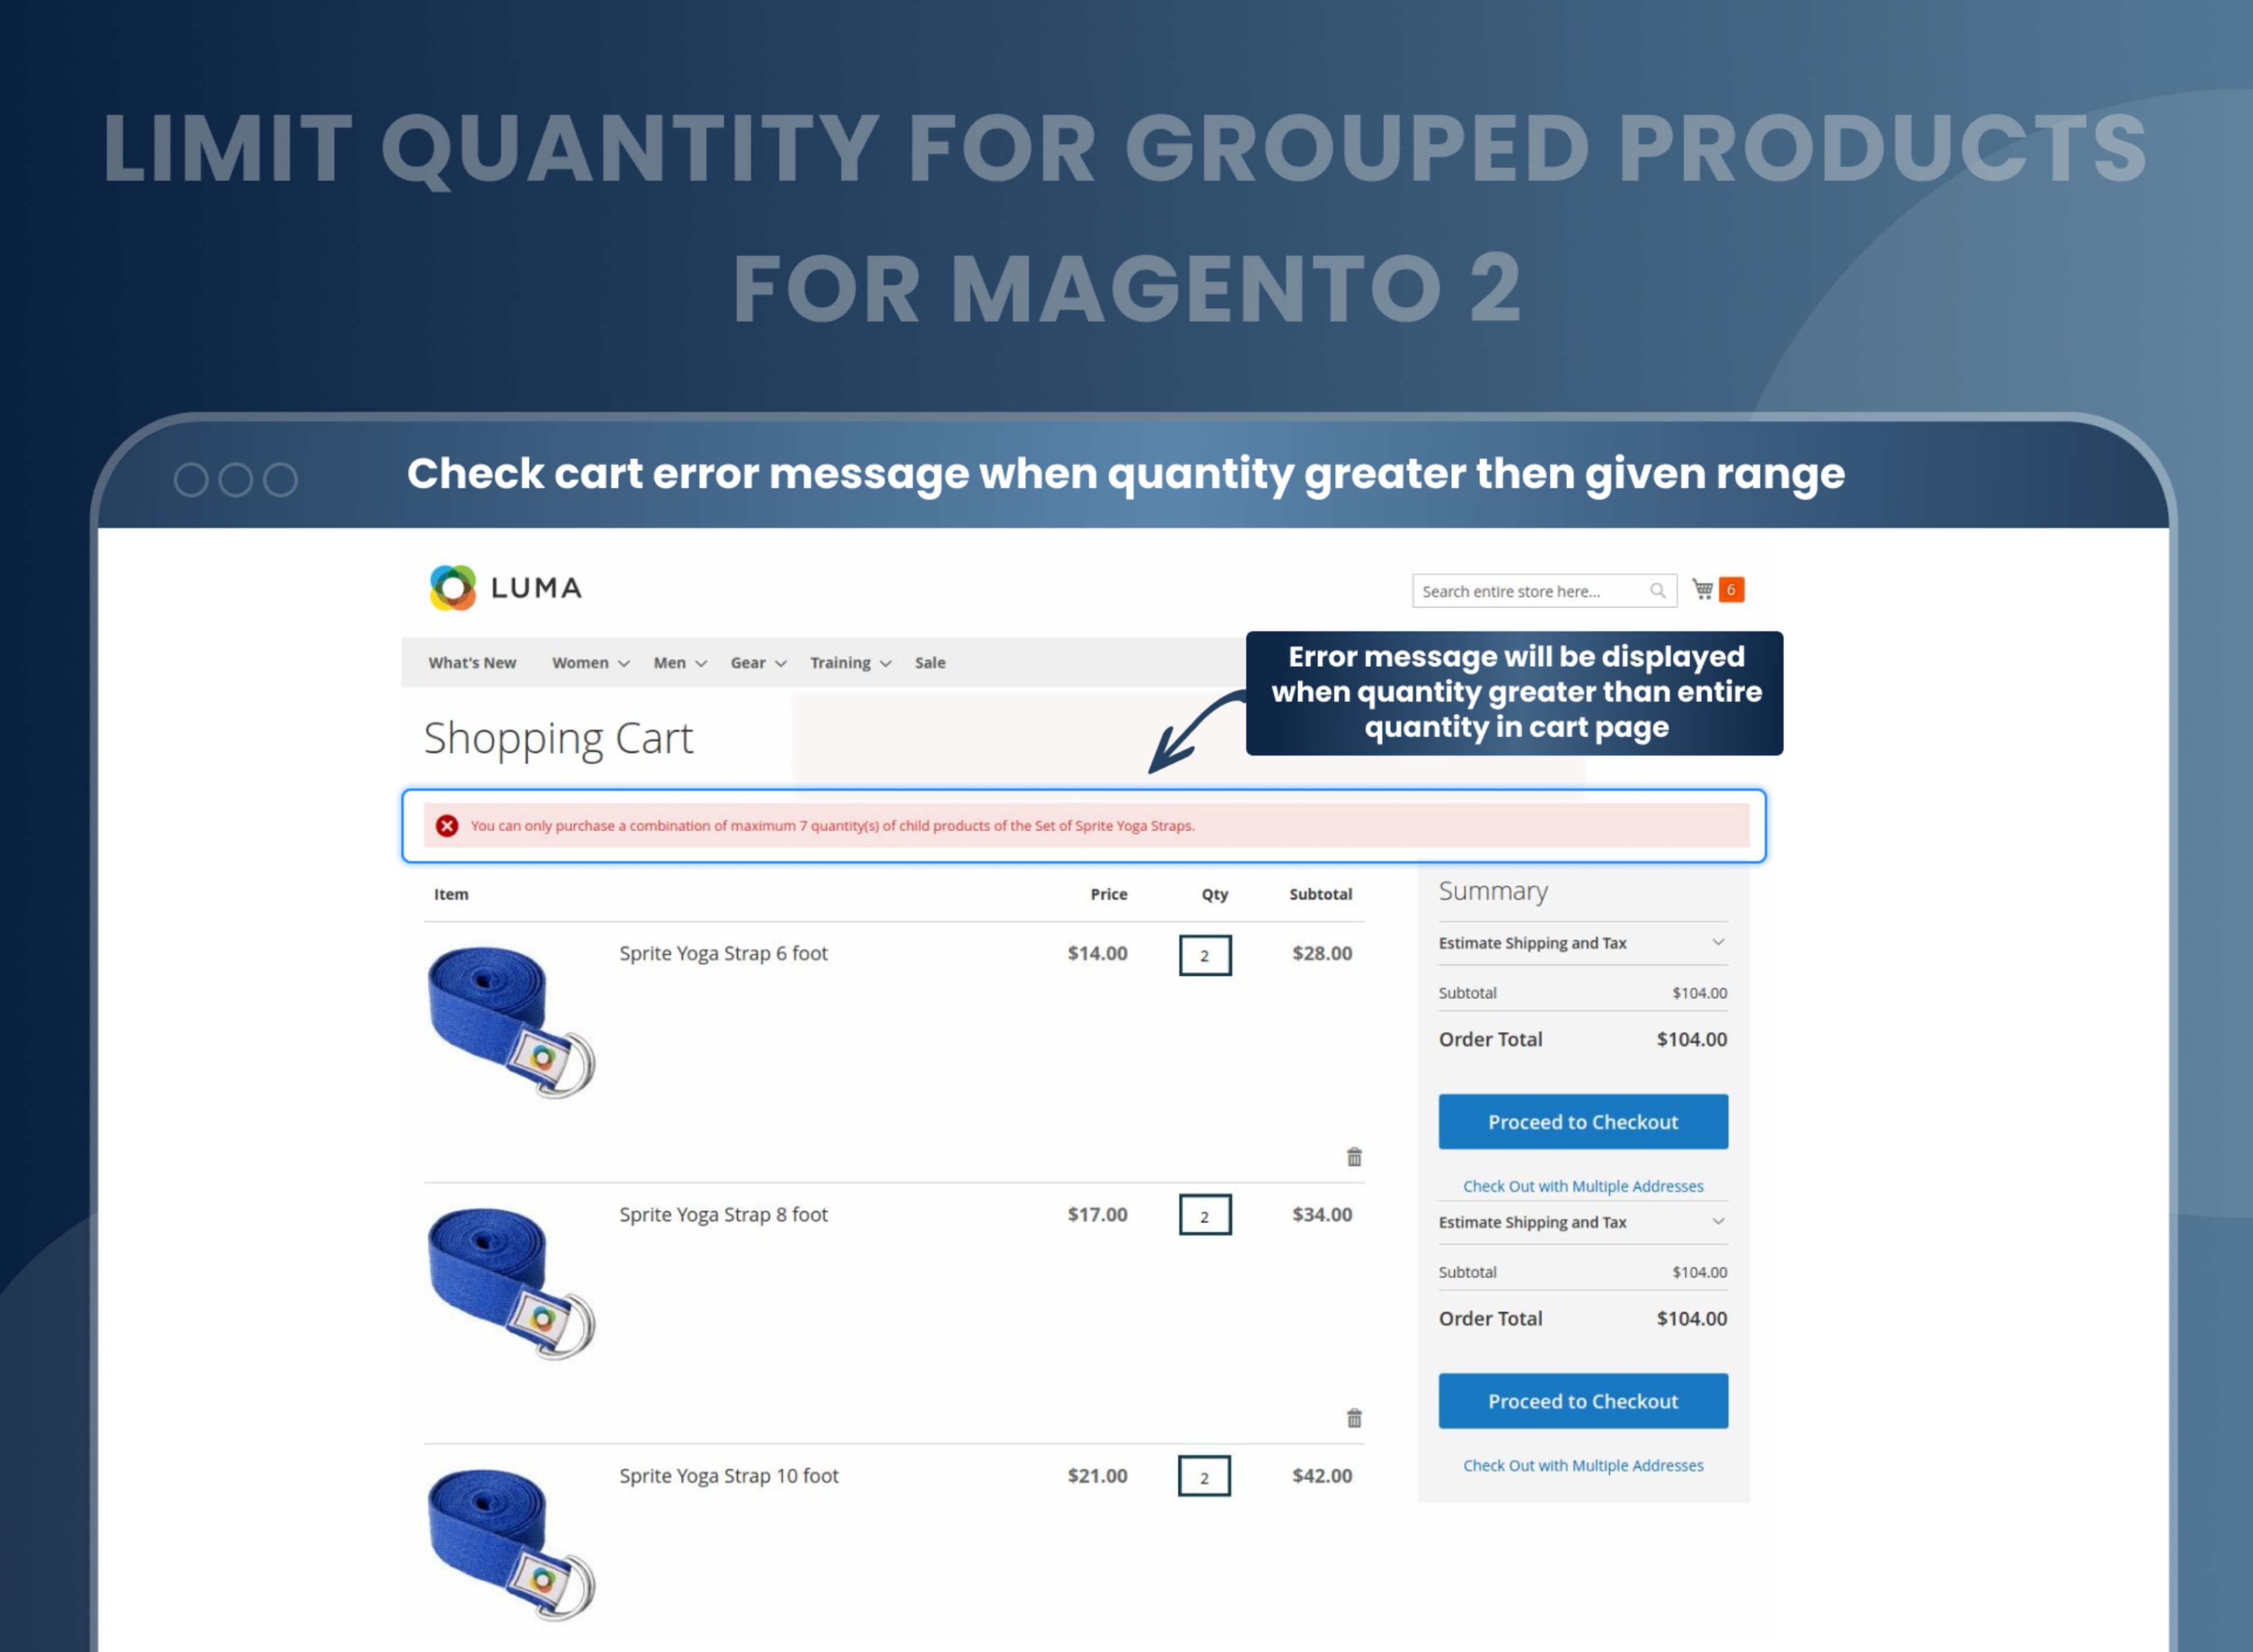 Check cart error message when quantity greater then given range